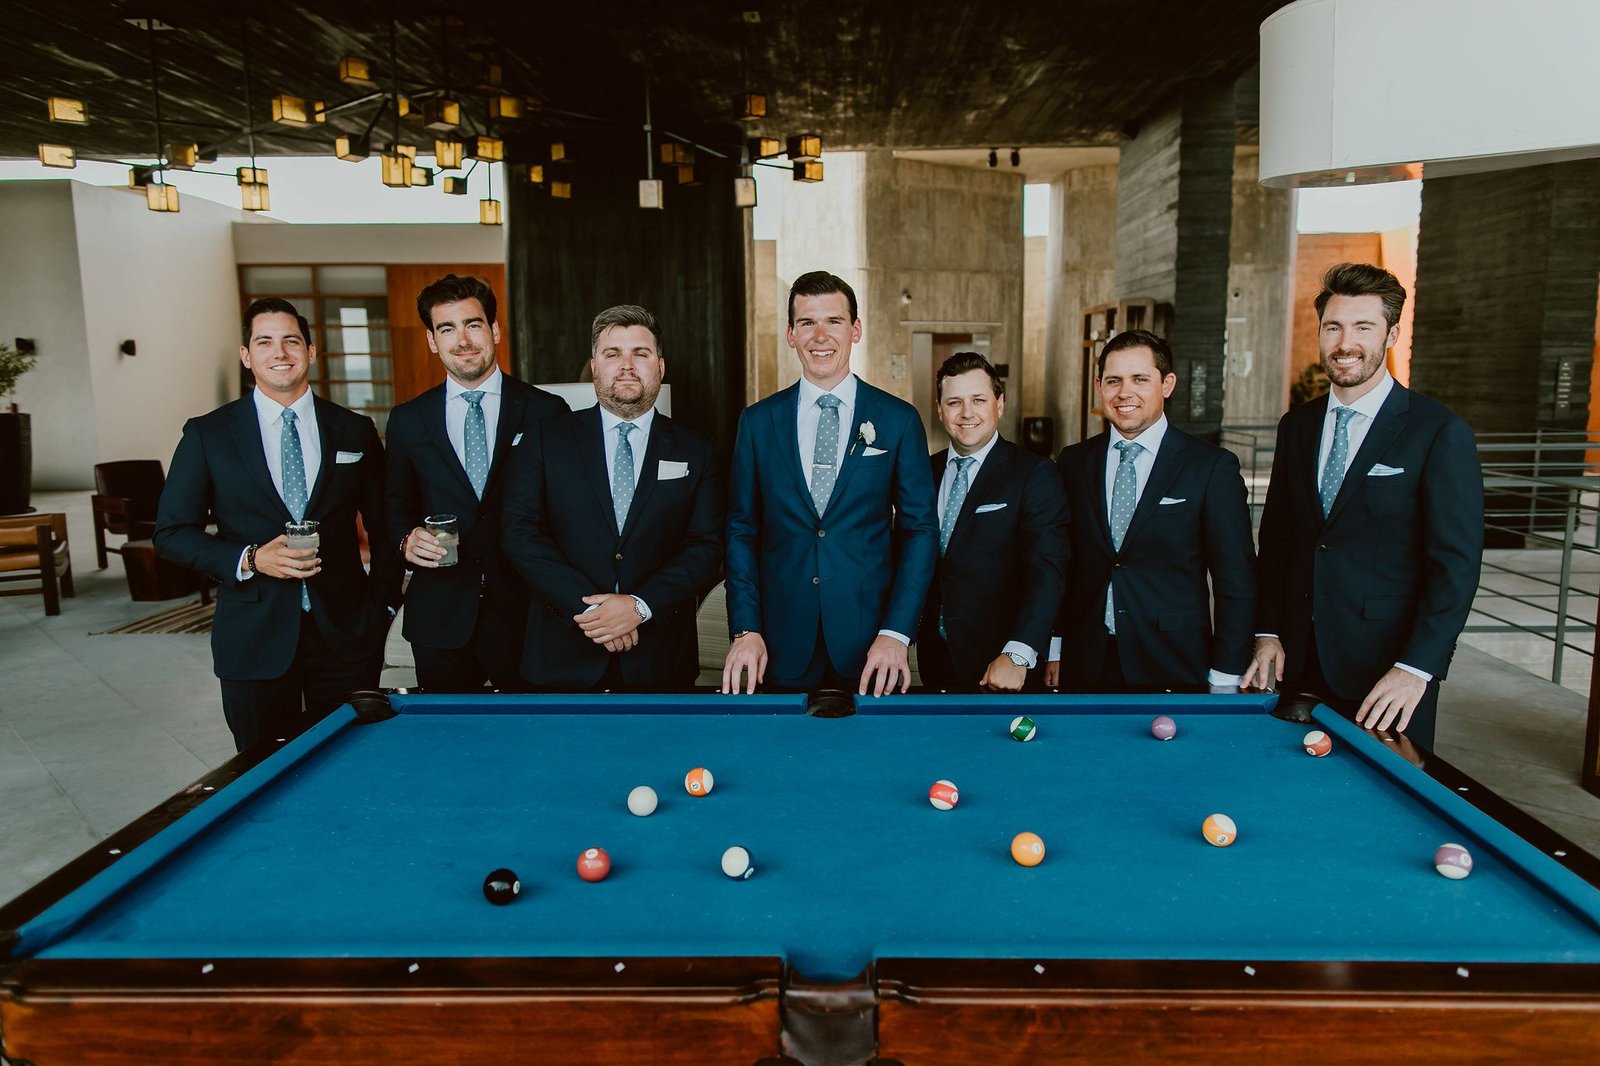 Groom and Groomsmen posing by the Pool Table at the Lobby bar at The Cape in Cabo San Lucas, Mexico. Wedding planning and design by Cabo Wedding Services